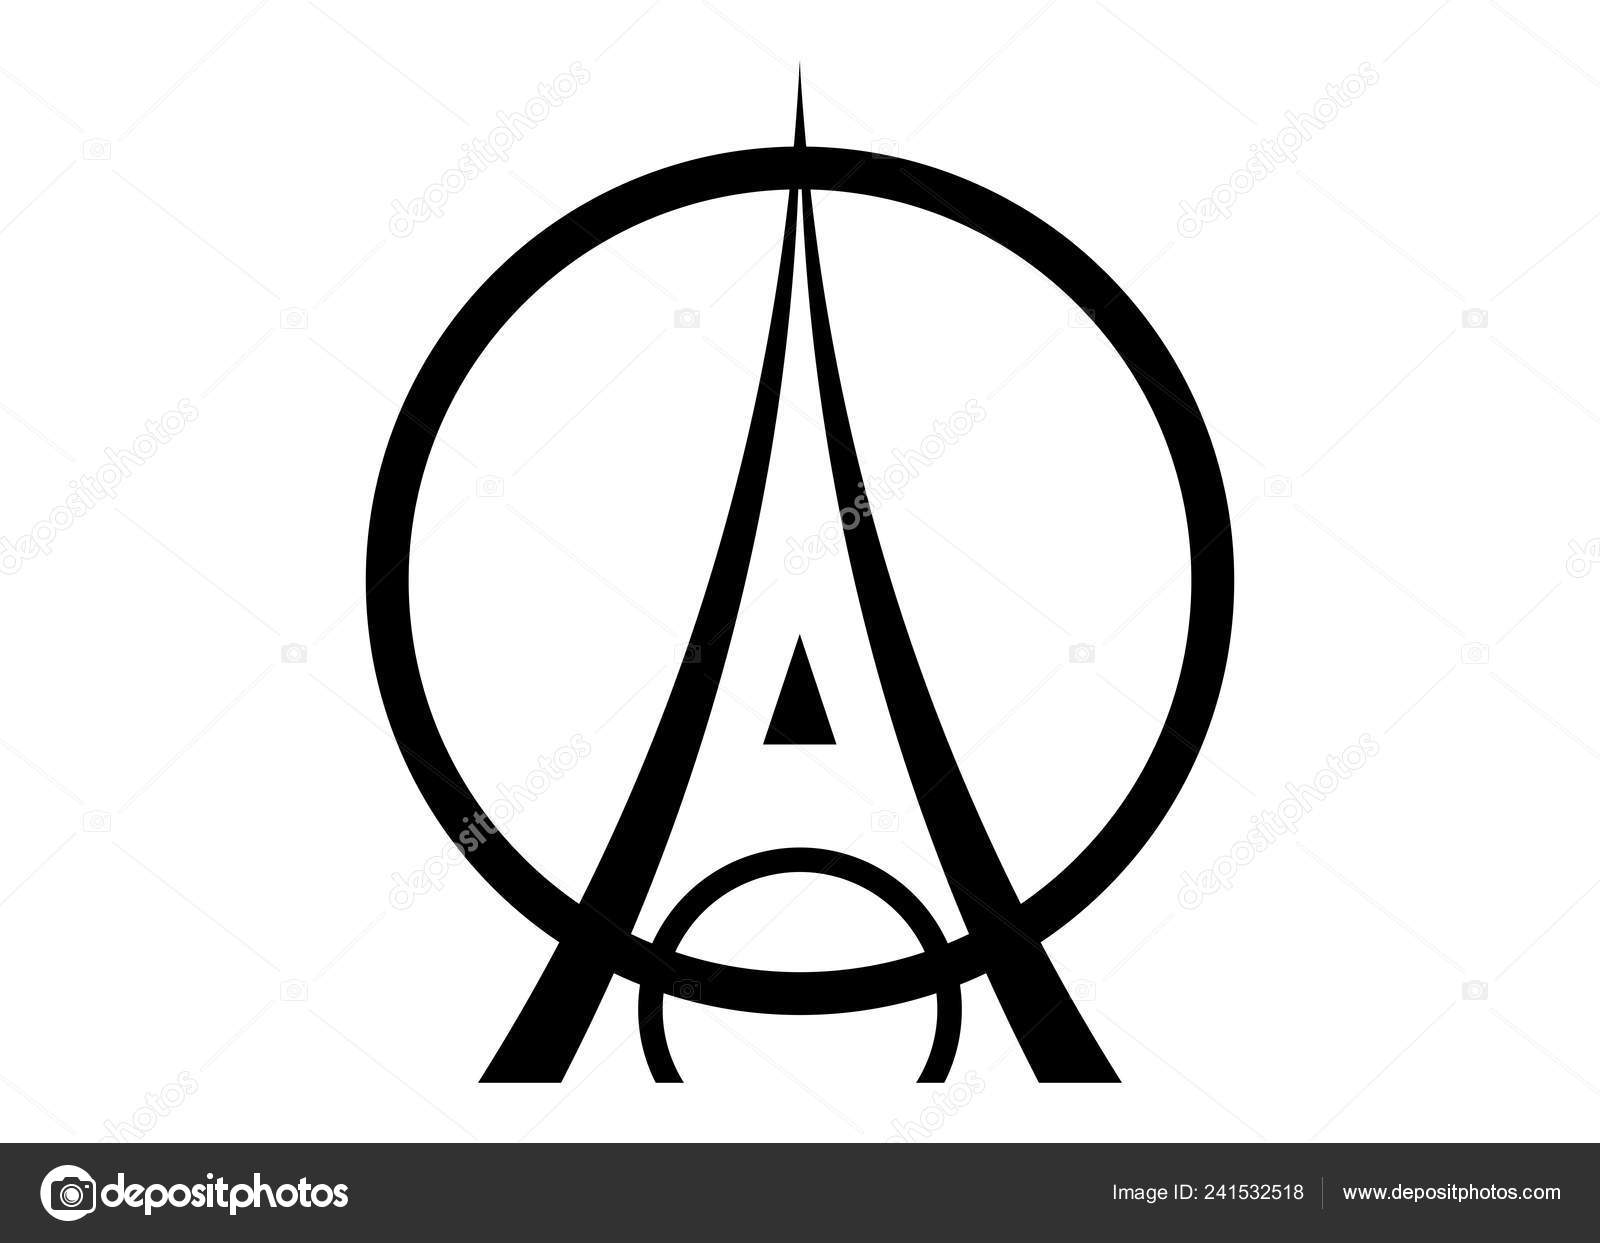 eiffel tower icon over white background, silhouette style, vector